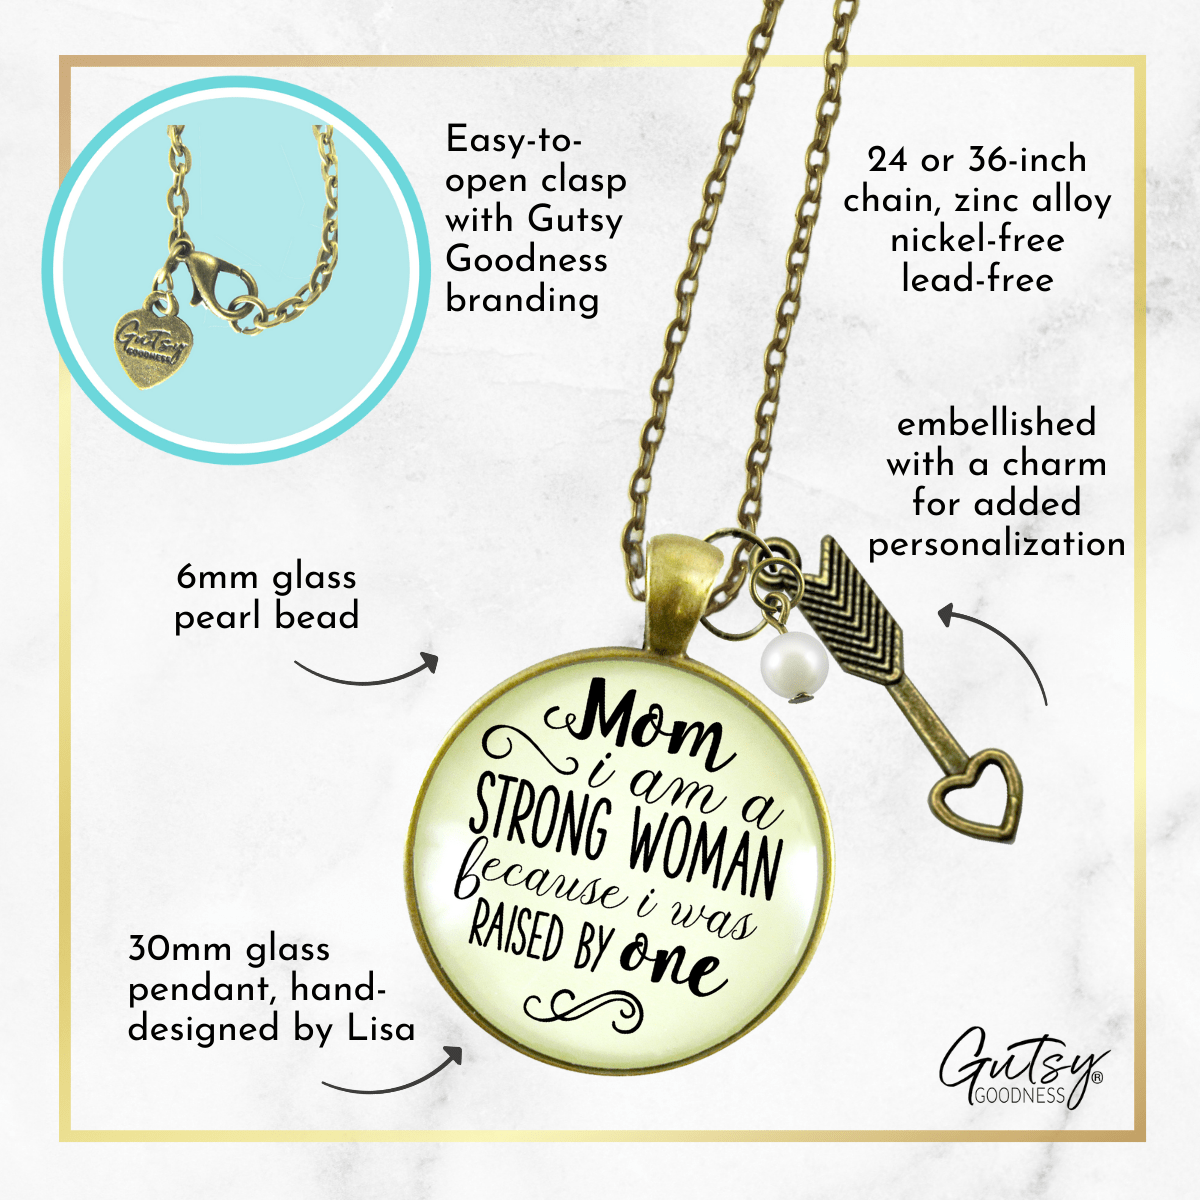 Gutsy Goodness To Mother From Daughter Necklace Mom I Am A Strong Woman Because of You Gift - Gutsy Goodness Handmade Jewelry;To Mother From Daughter Necklace Mom I Am A Strong Woman Because Of You Gift - Gutsy Goodness Handmade Jewelry Gifts